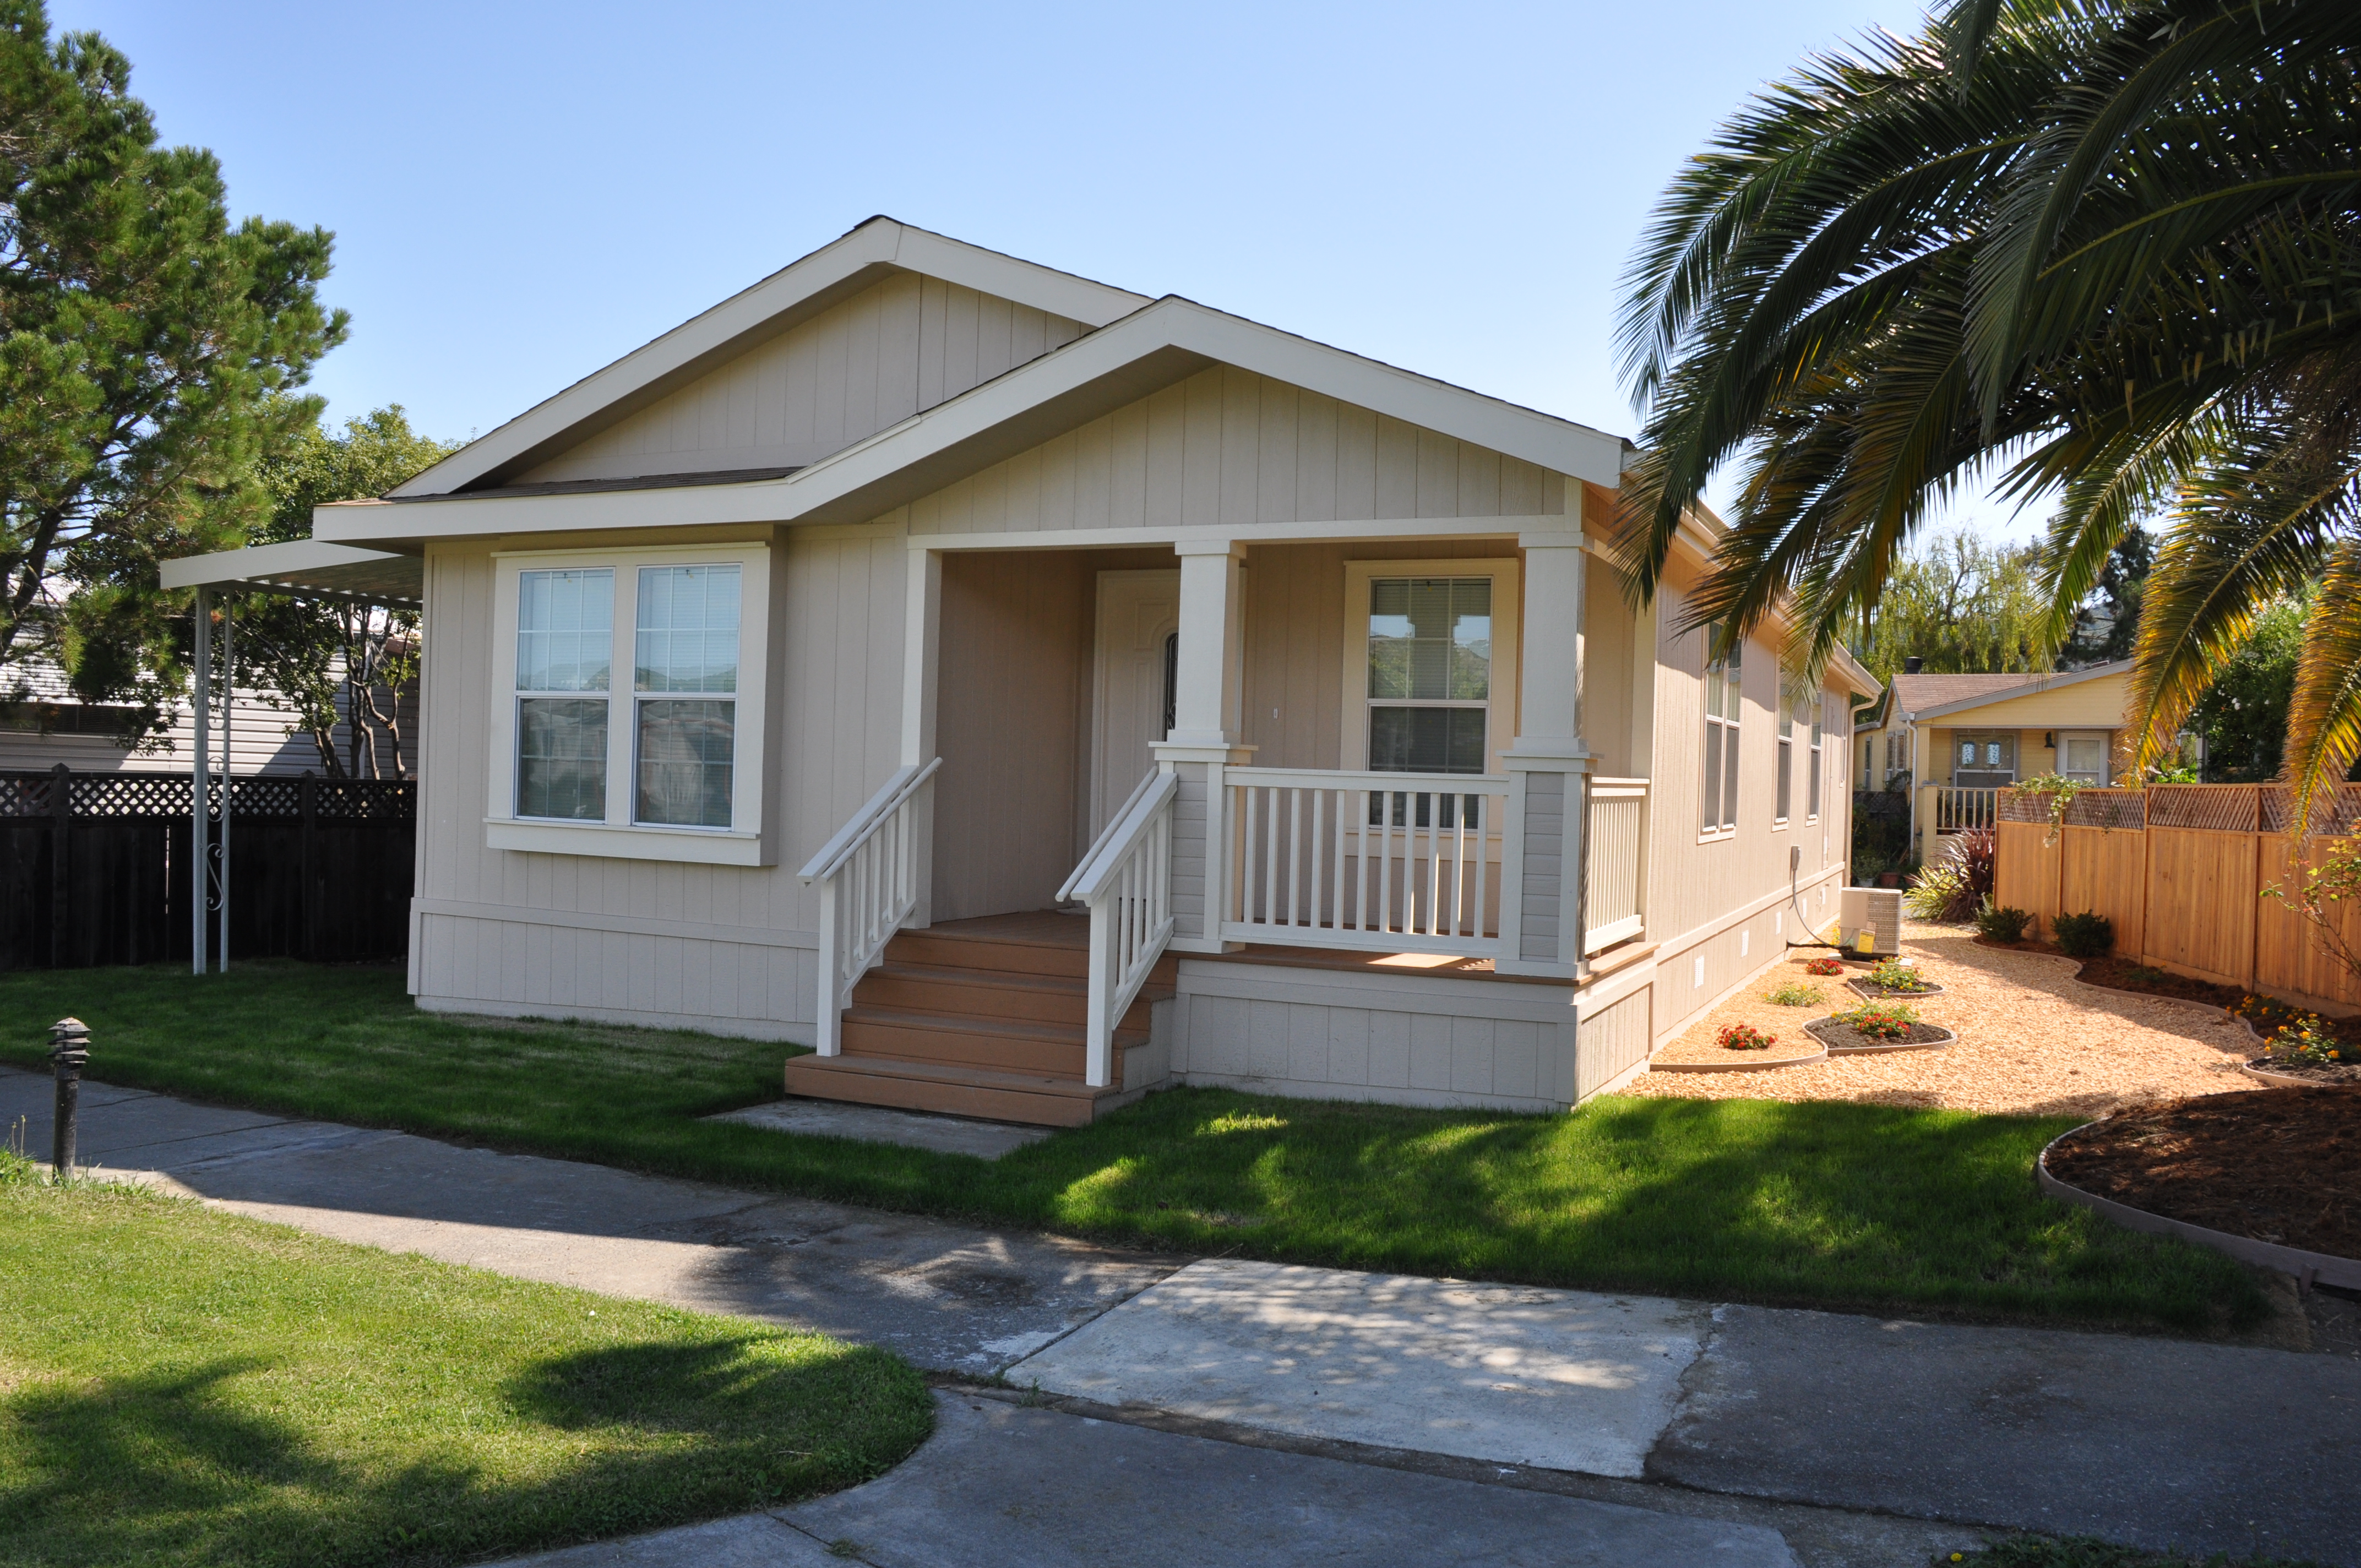 How do mobile home loans work?